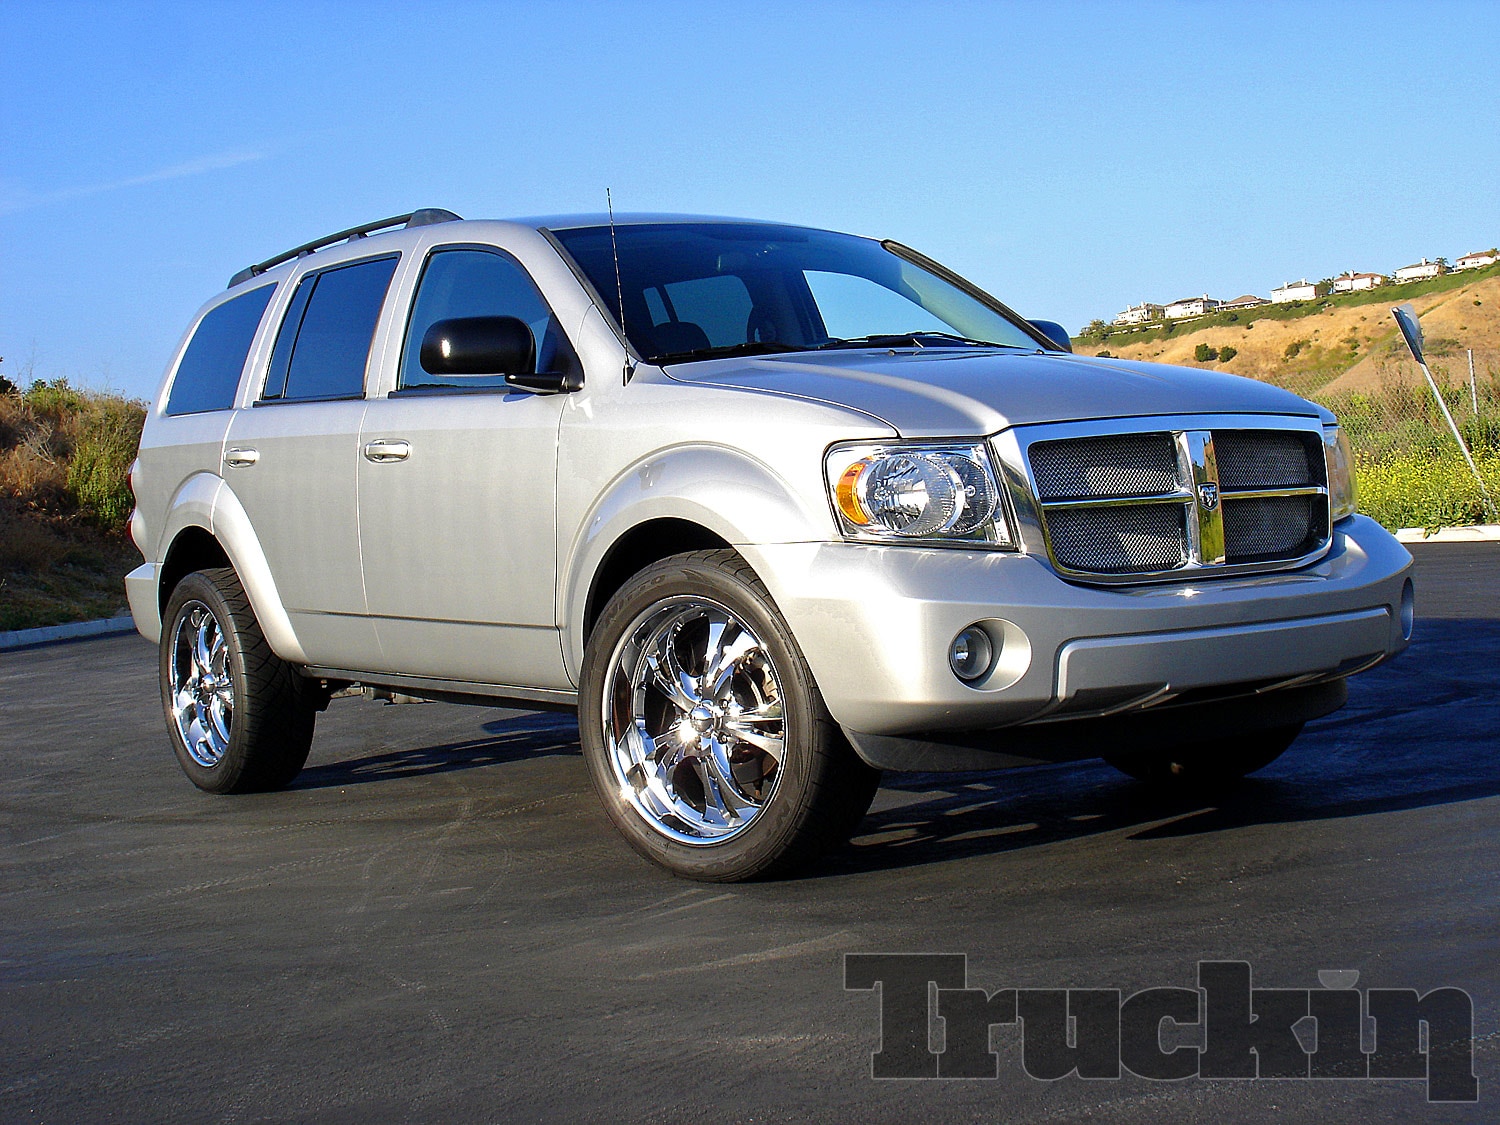 Cost-Effective Modifications on a 2008 Dodge Durango - Web Exclusive